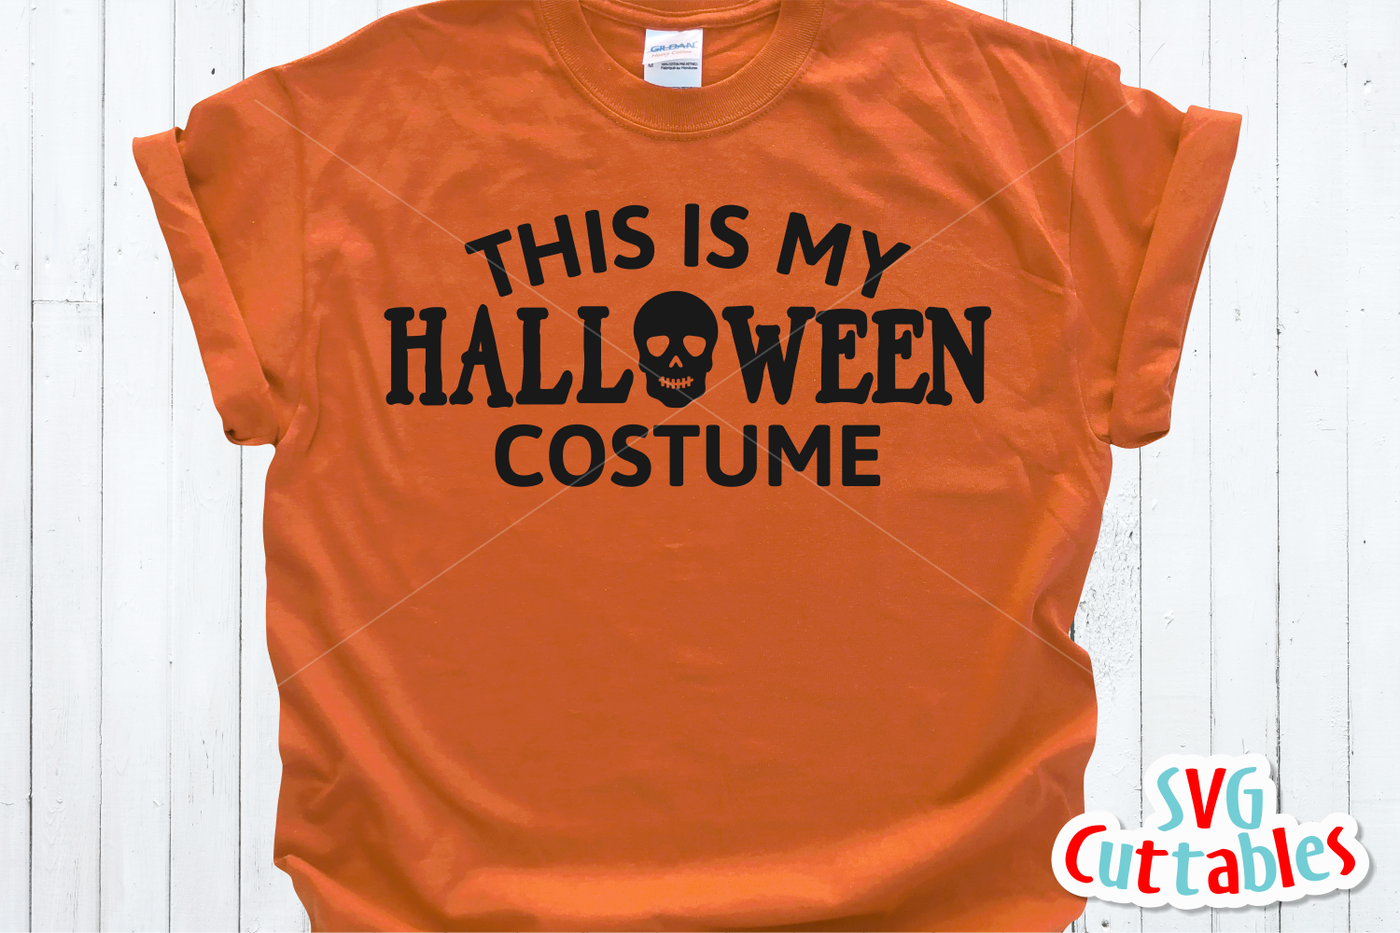 This is My Halloween Costume | SVG Cut File By Svg Cuttables ...